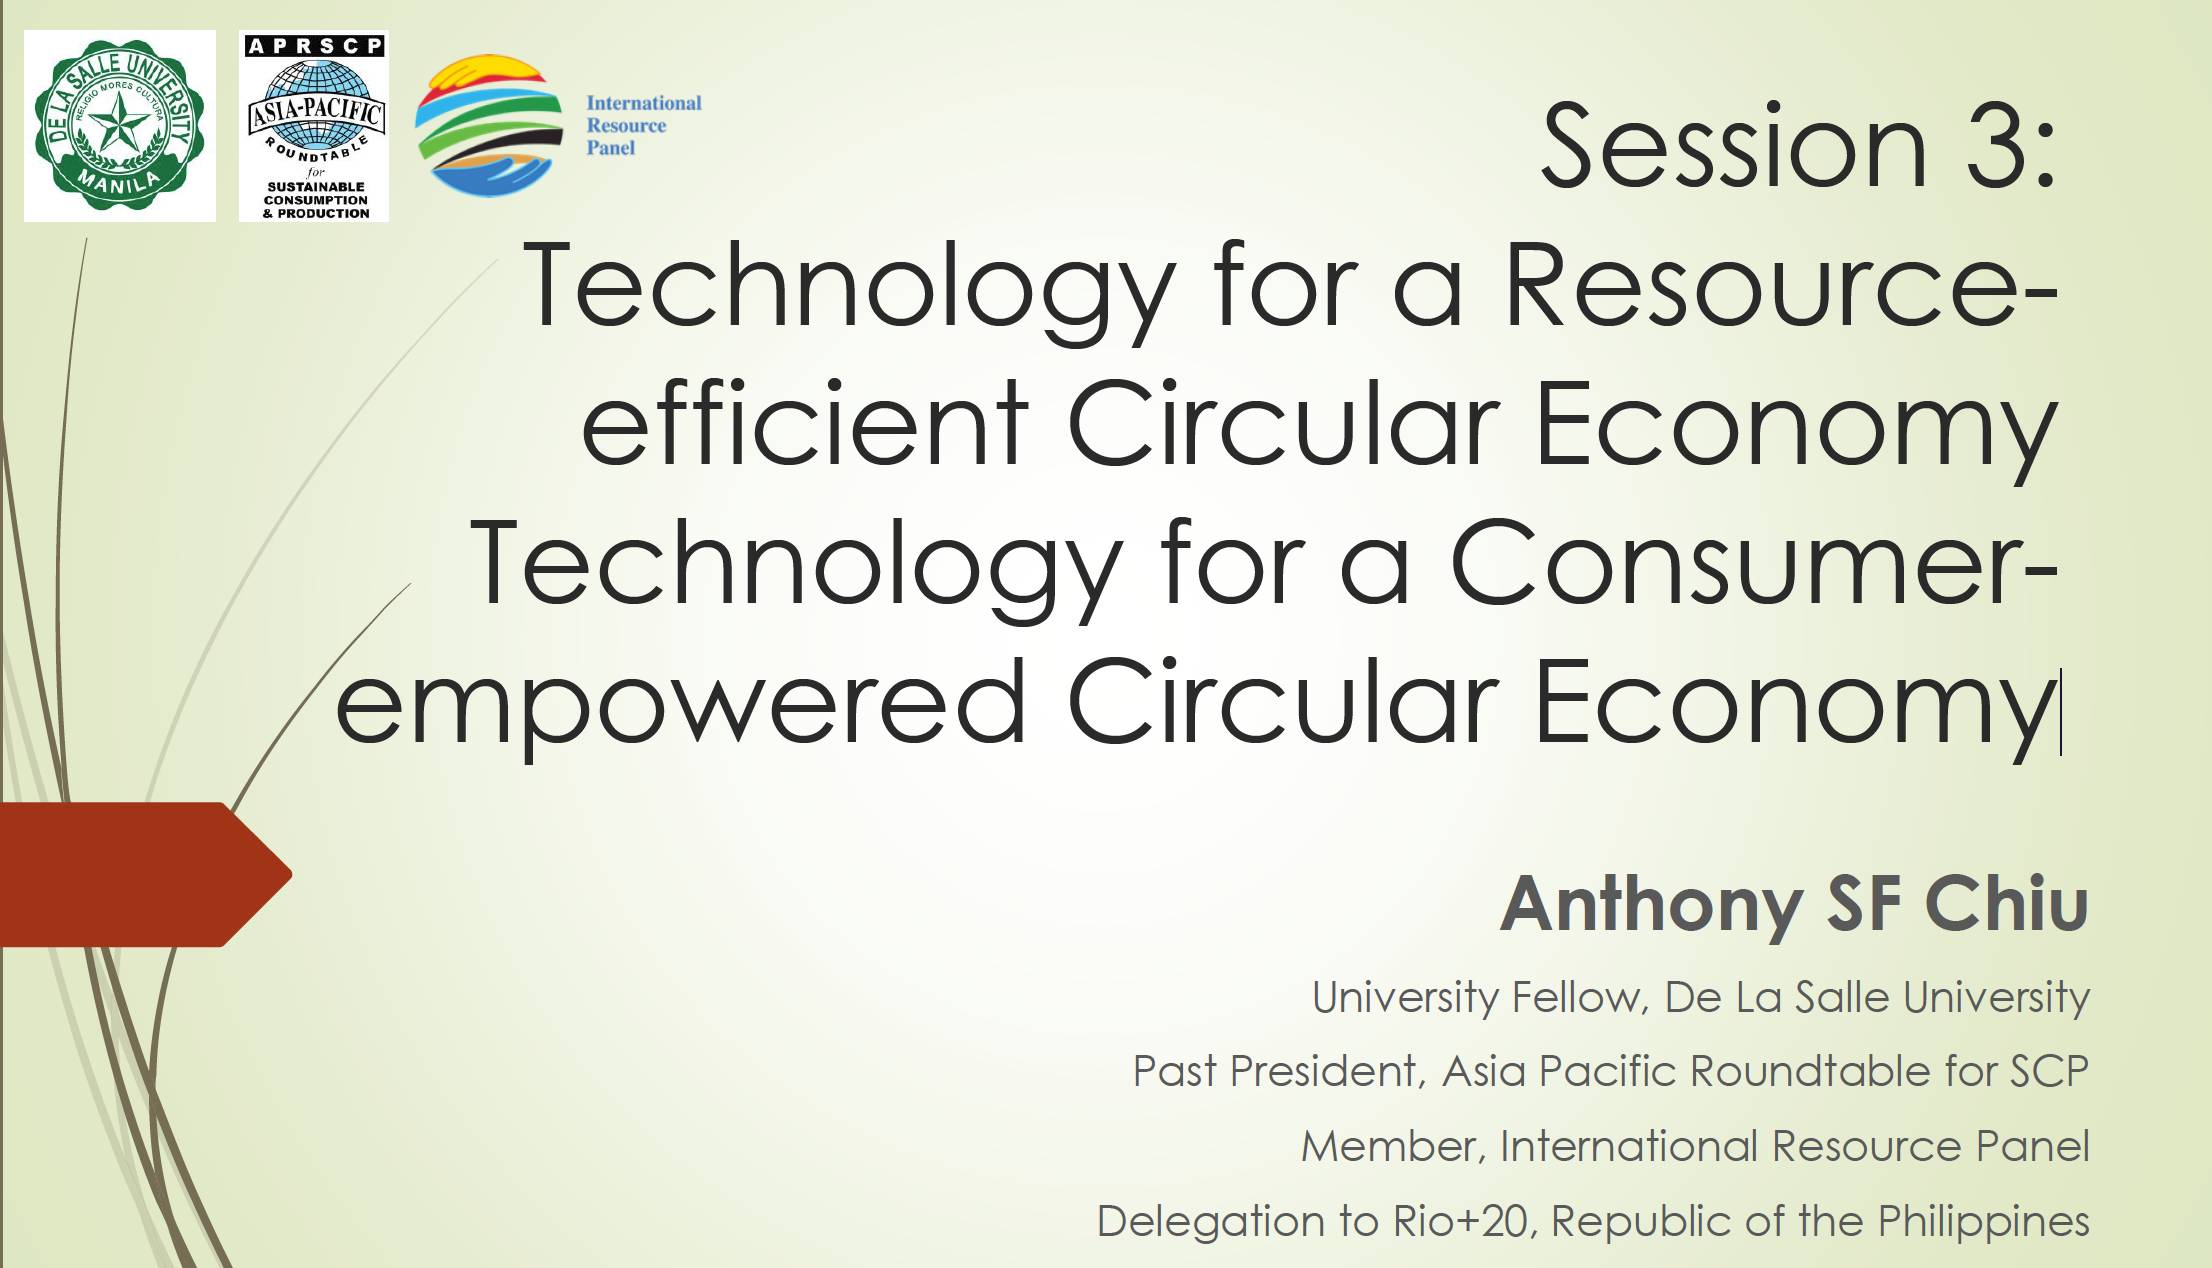 Technology for a Resource efficient Circular Economy